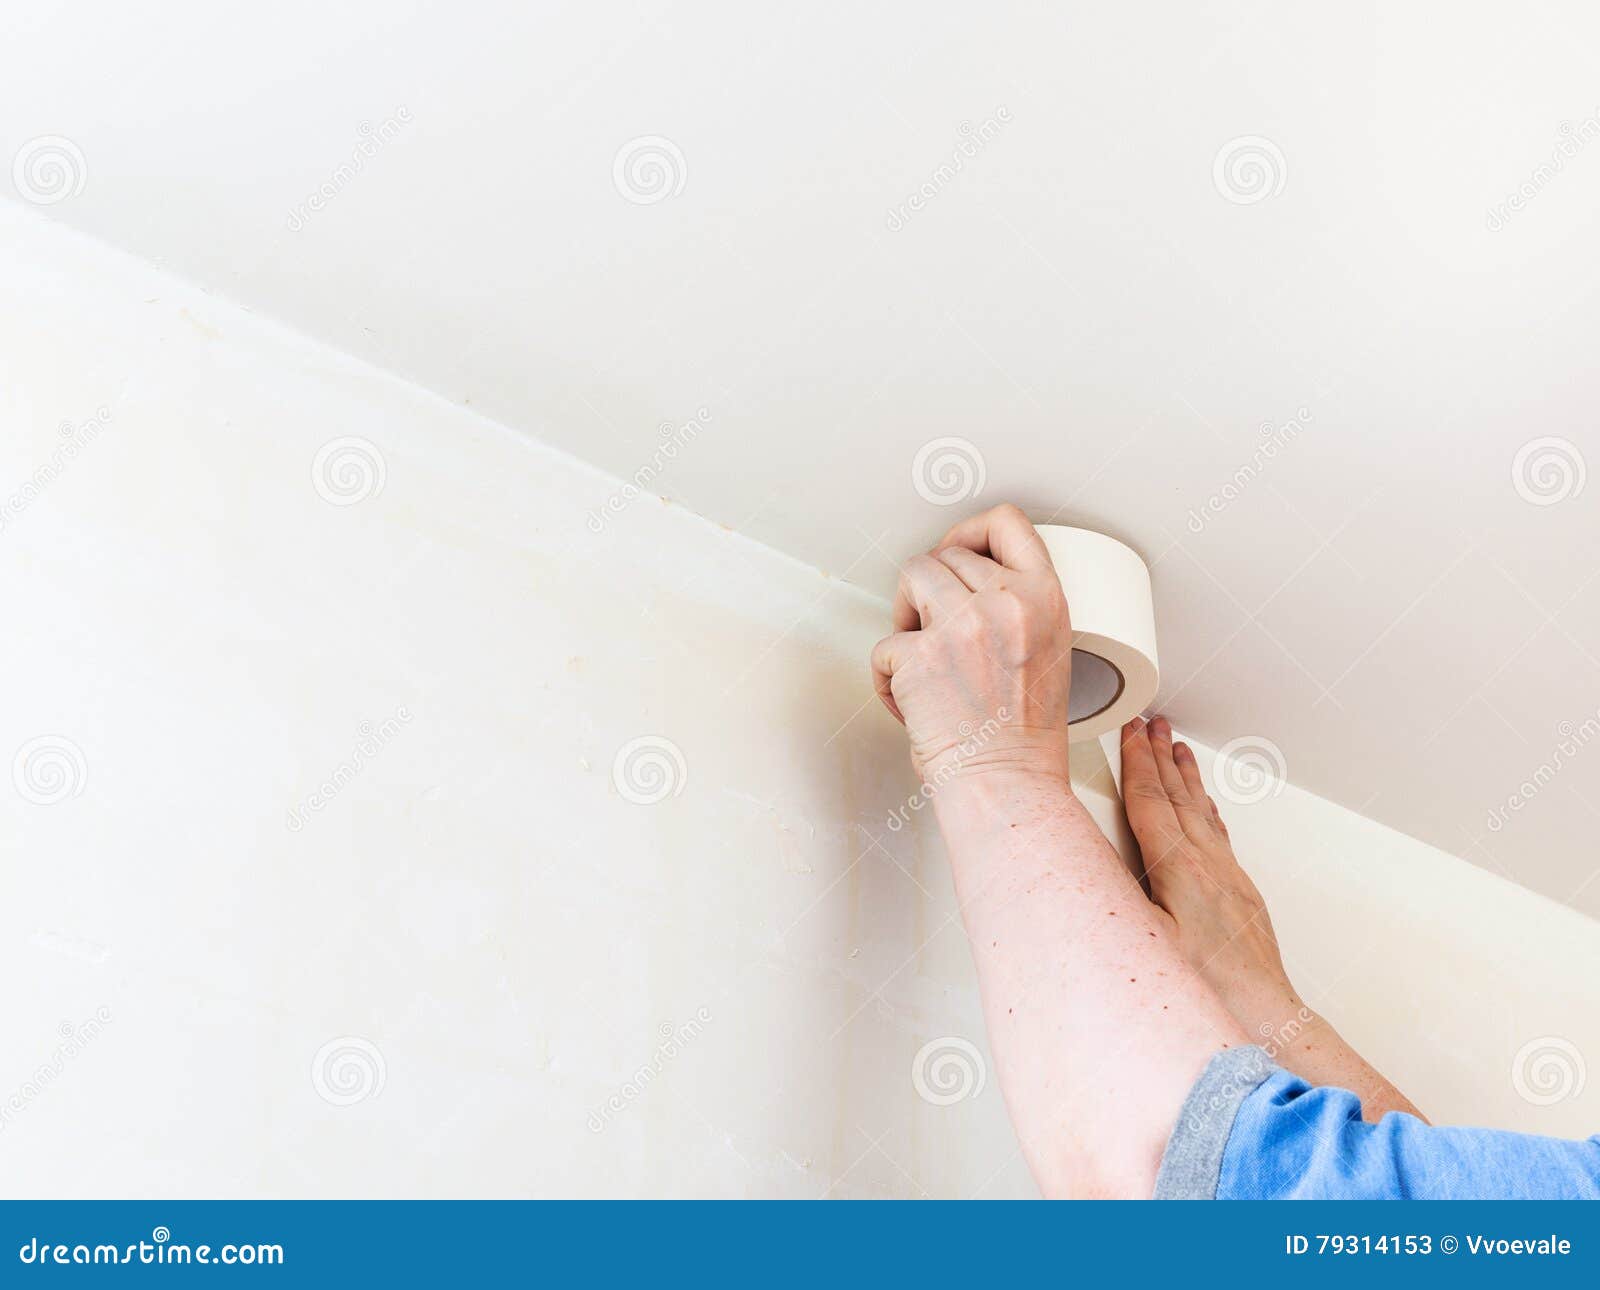 Decorator Fixes Tape On Wall Before Painting Stock Image